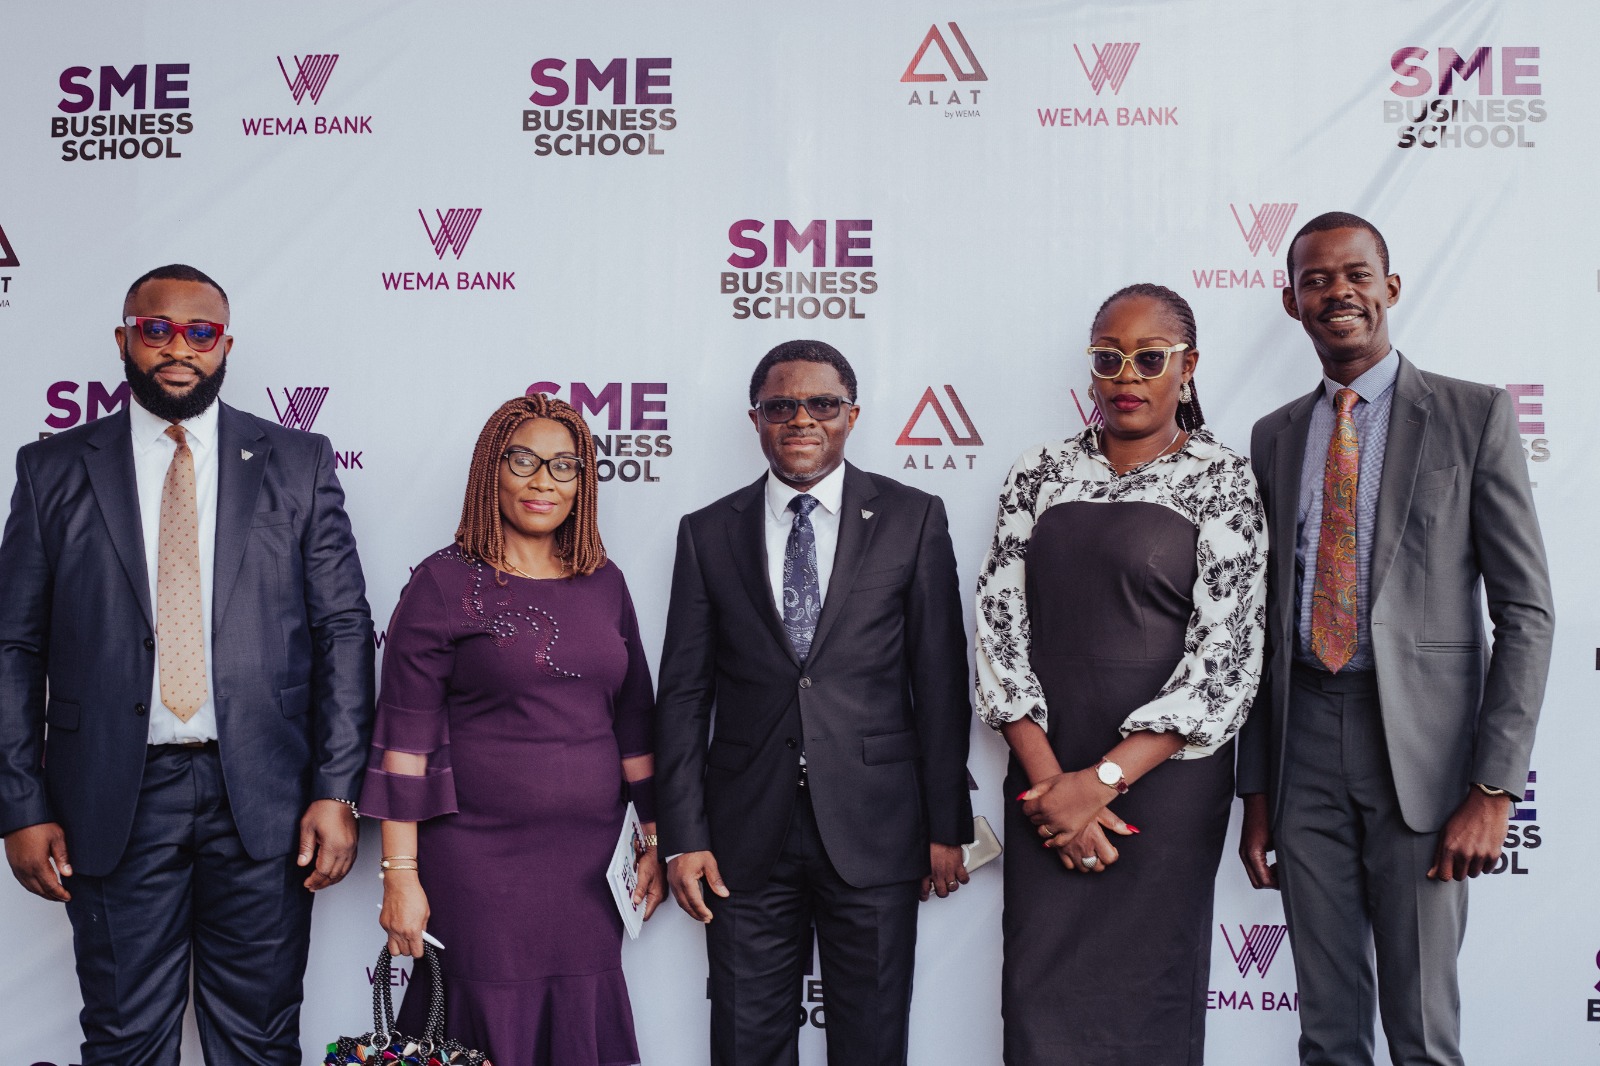 Wema Bank small business owners in Edo